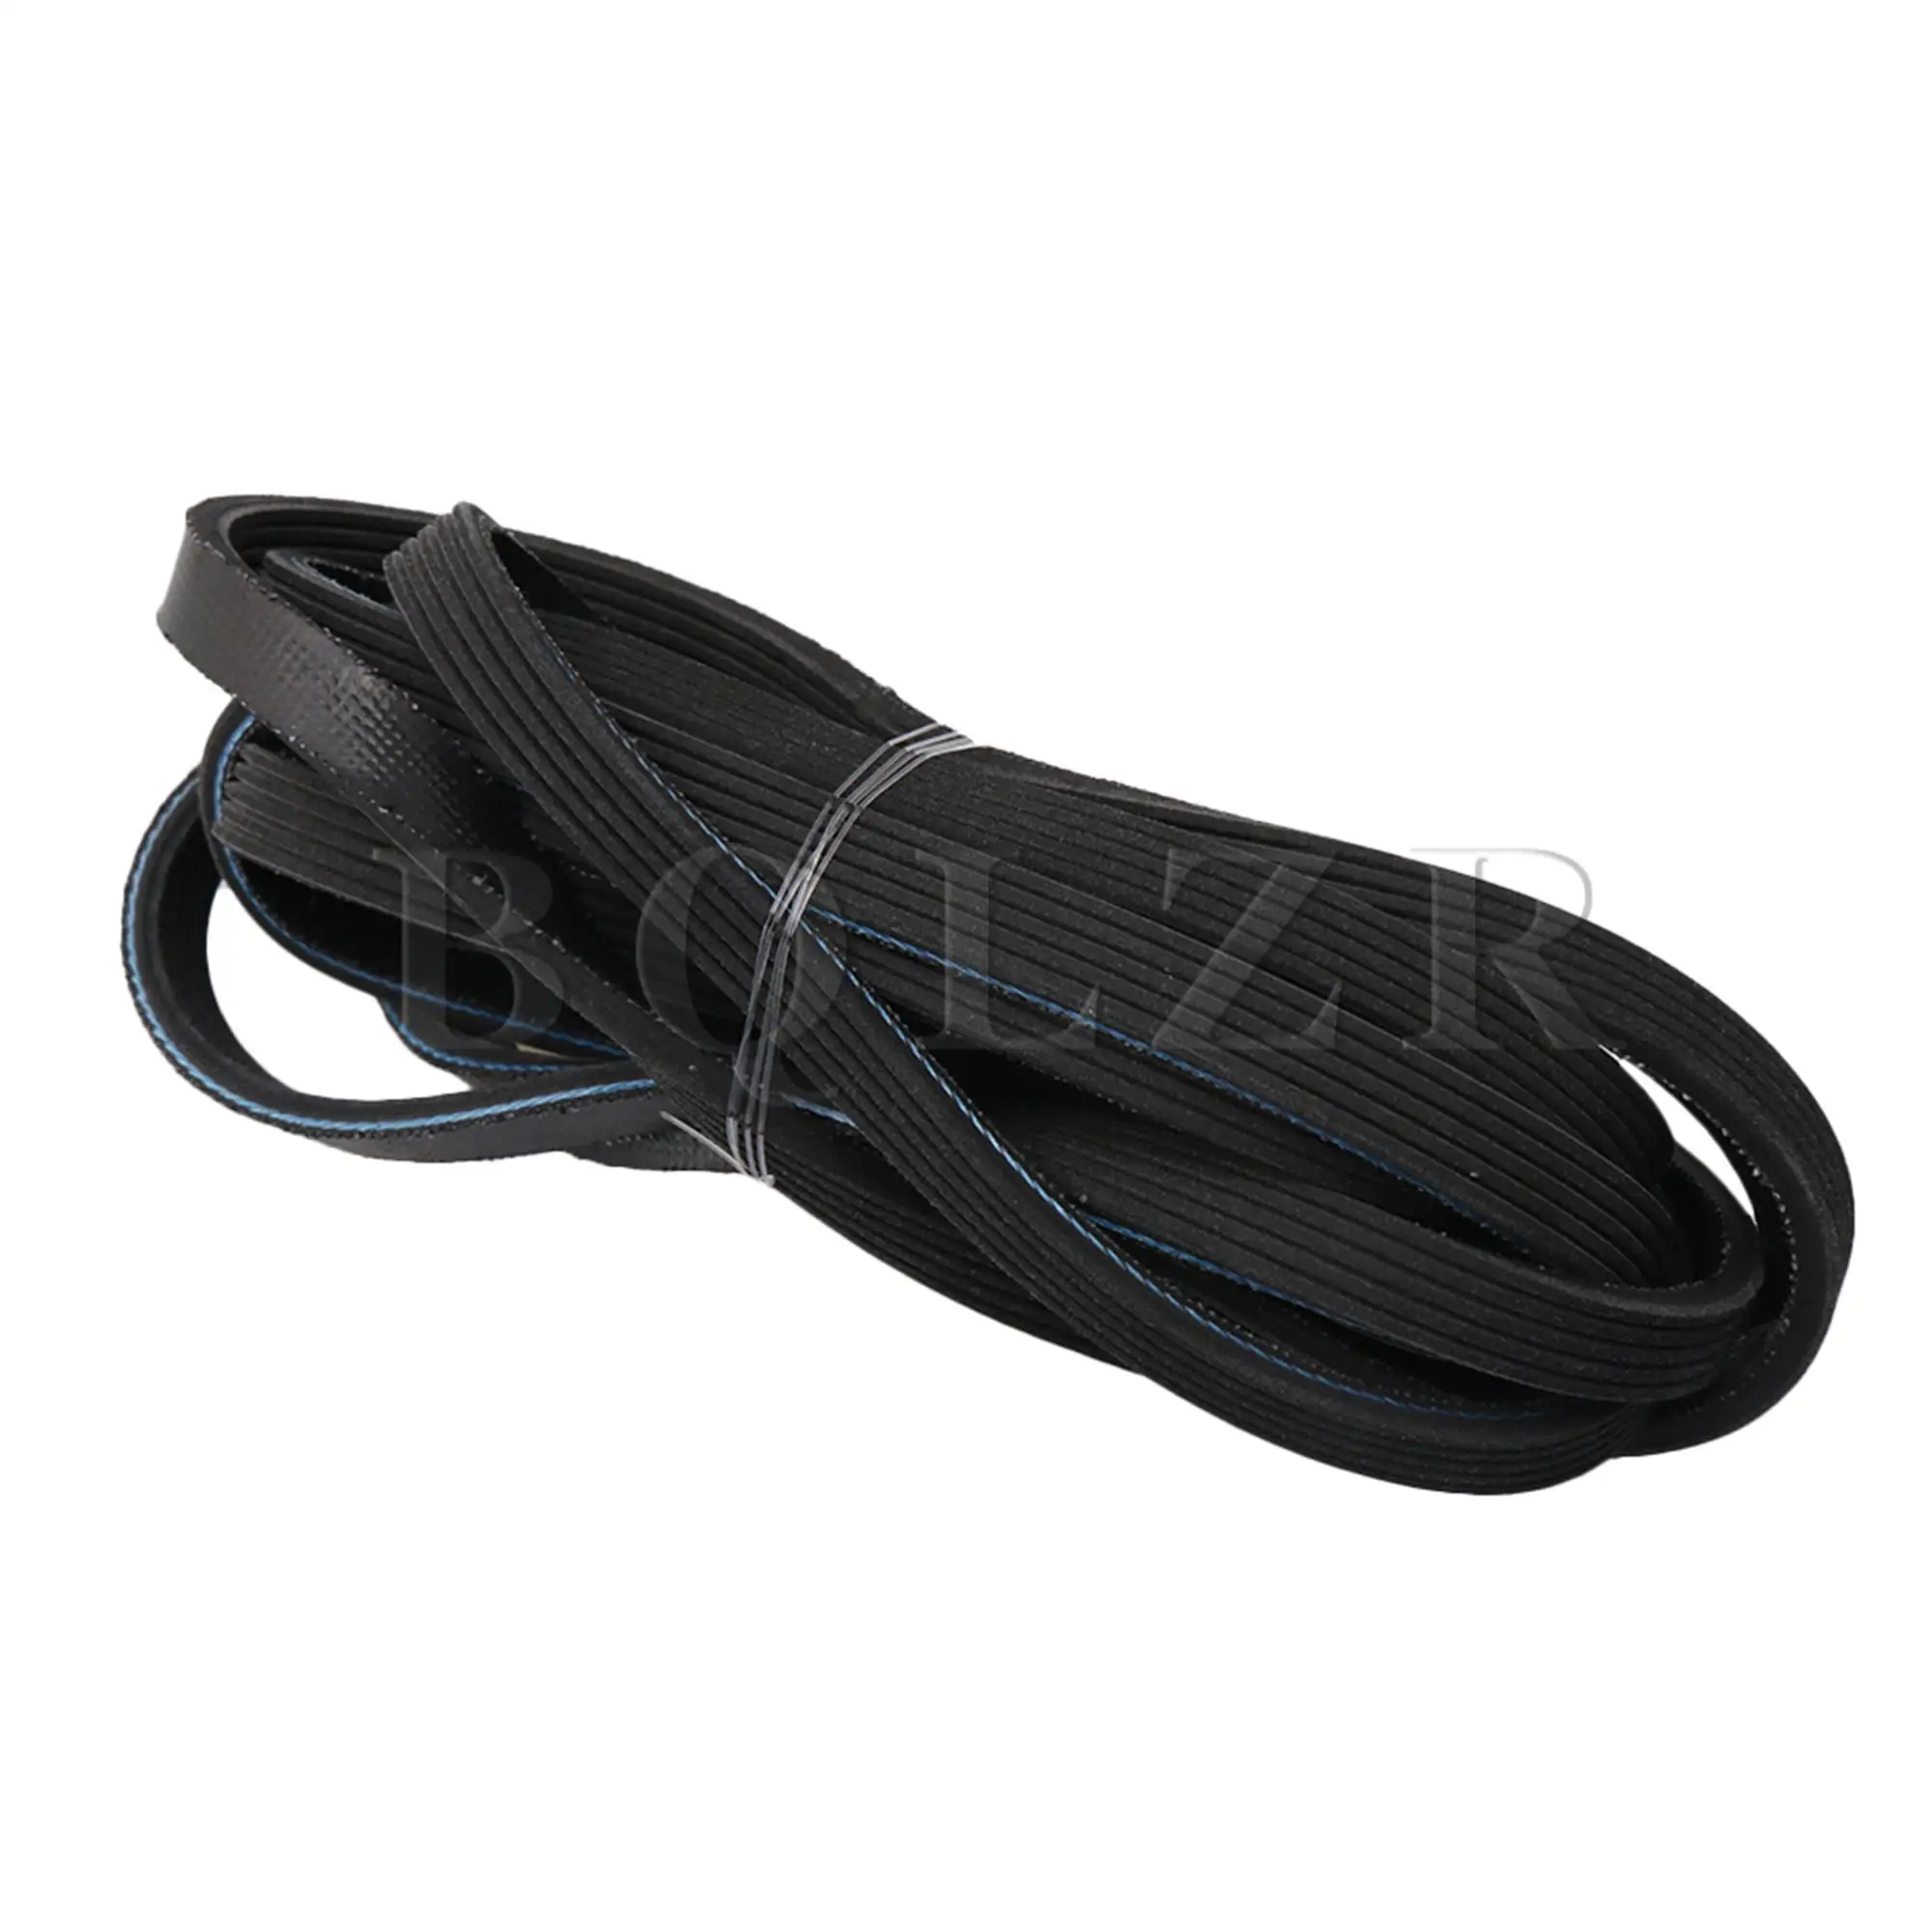 BQLZR Rubber Dryer Drum Drive Belt for Replacements Models 3387610 661570 image_2